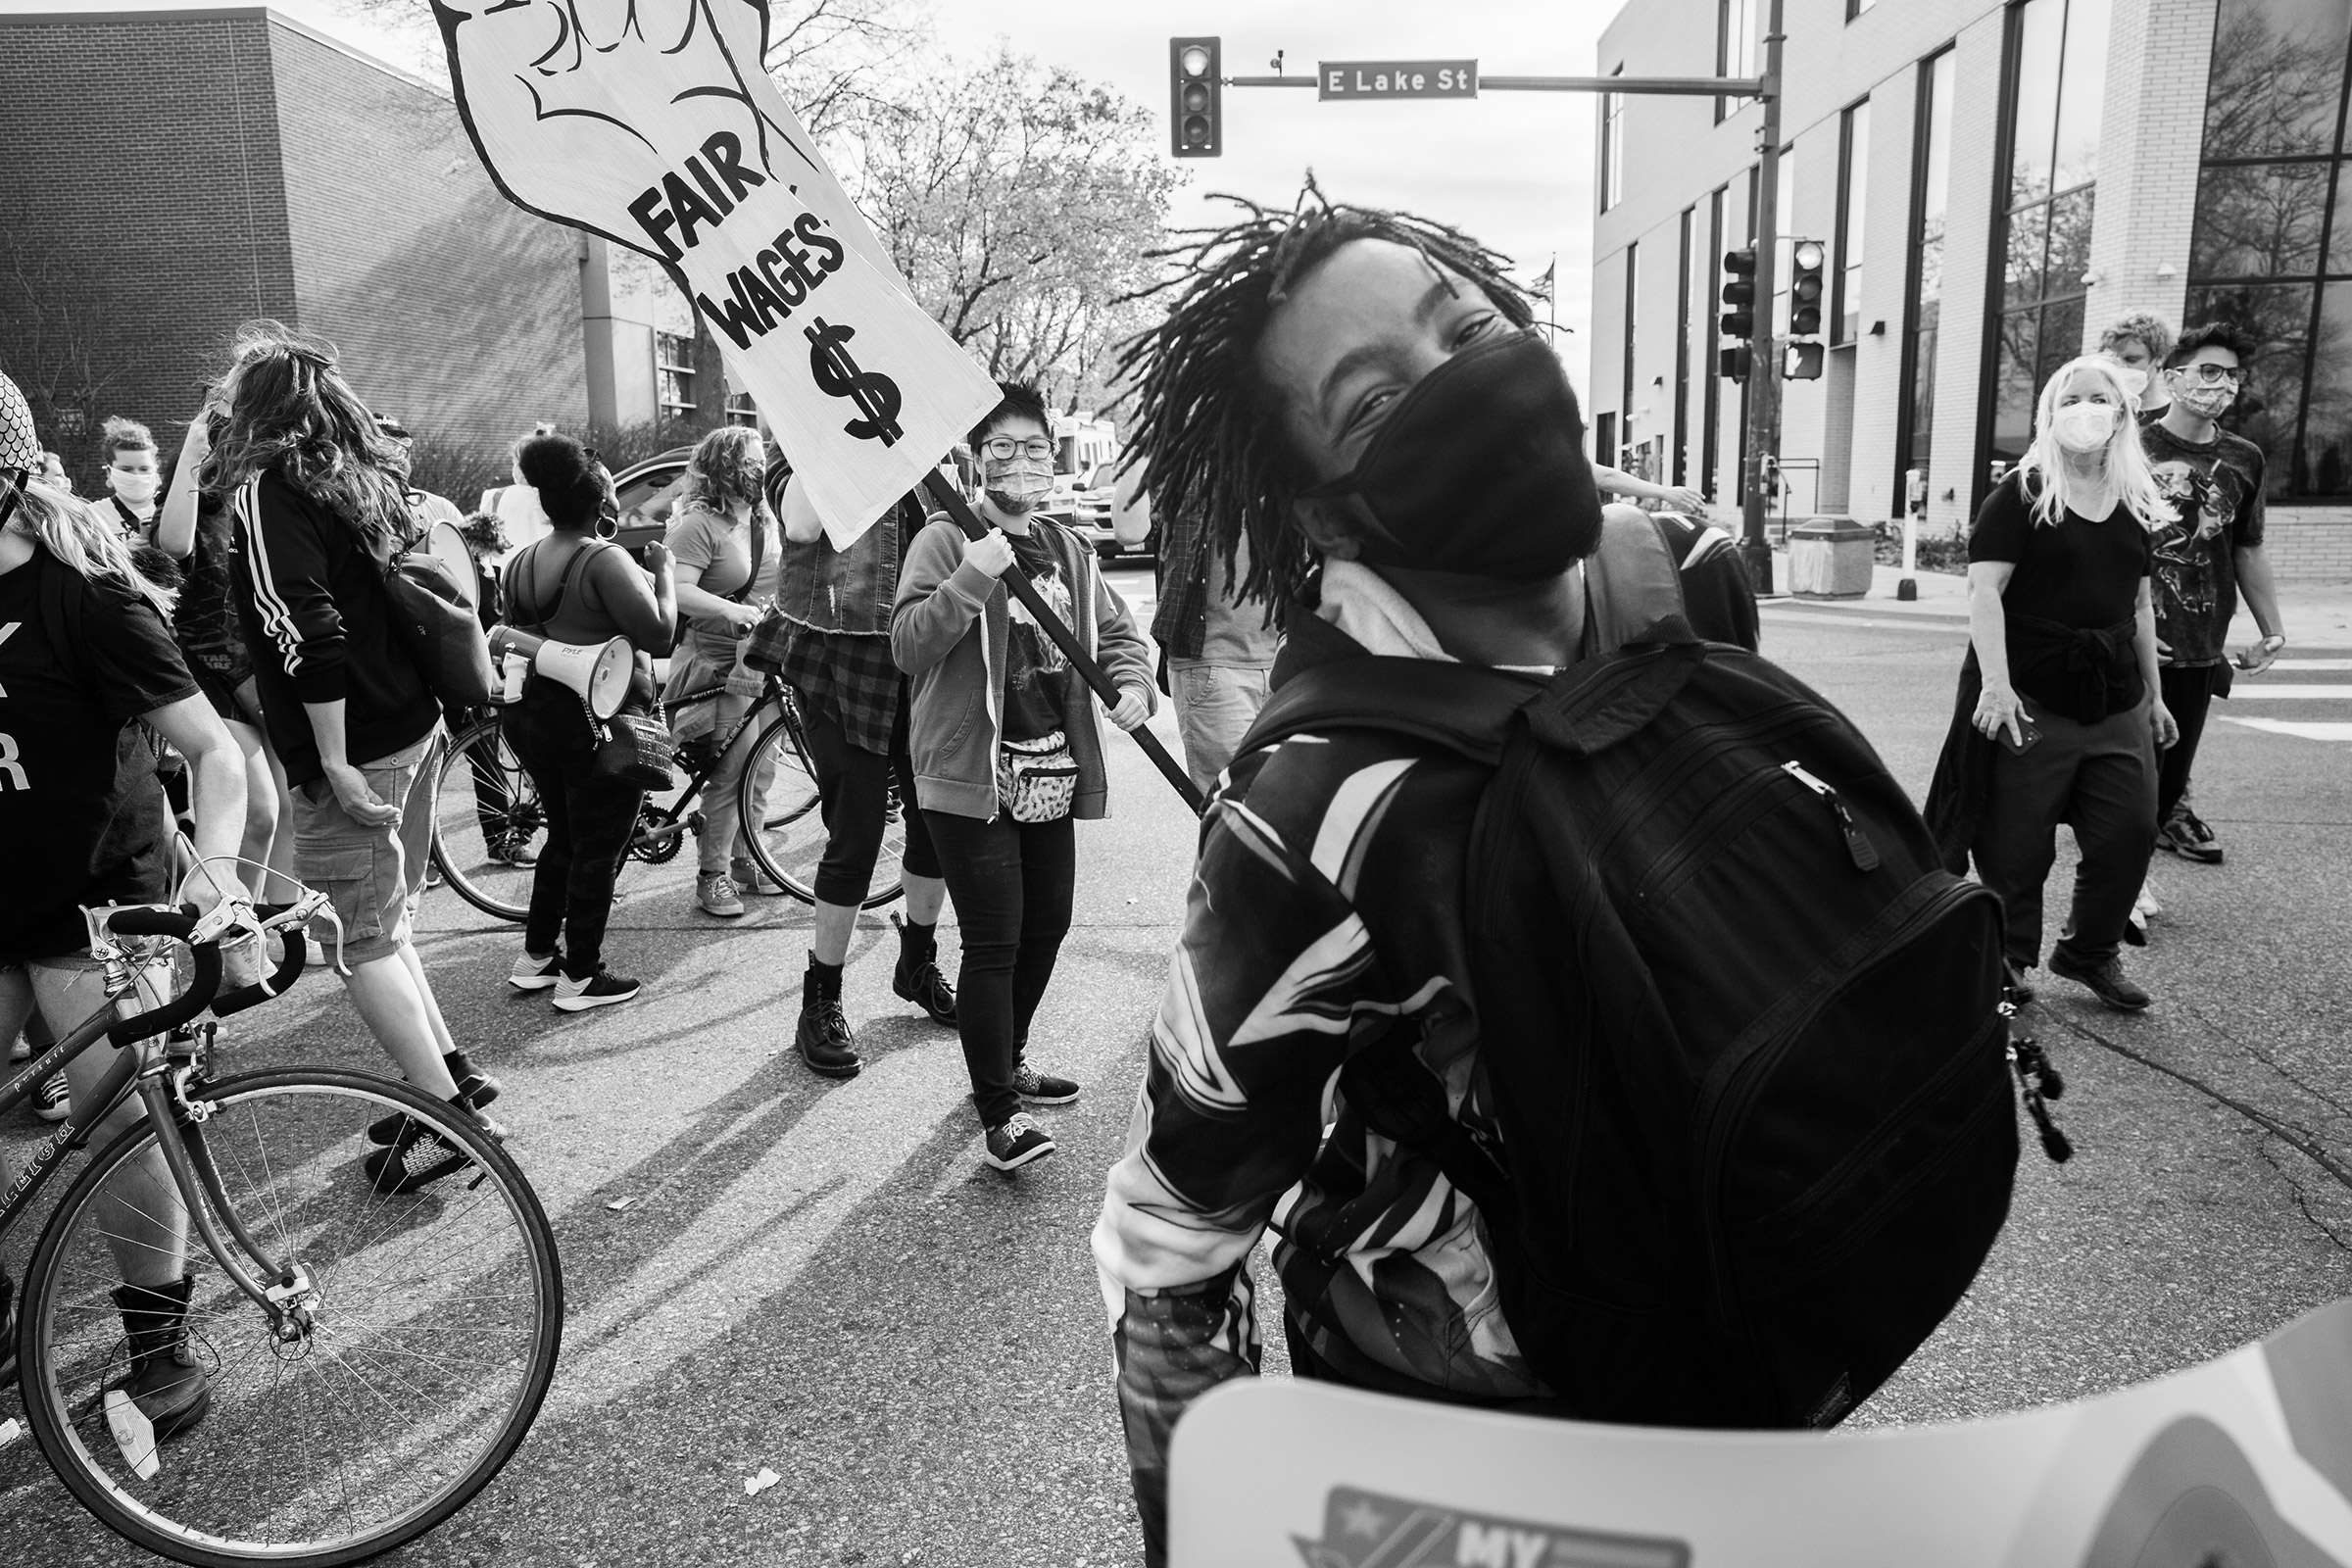 November 7th 2020- Demonstrators march and dance down Lake Street in South Minneapolis, Minnesota